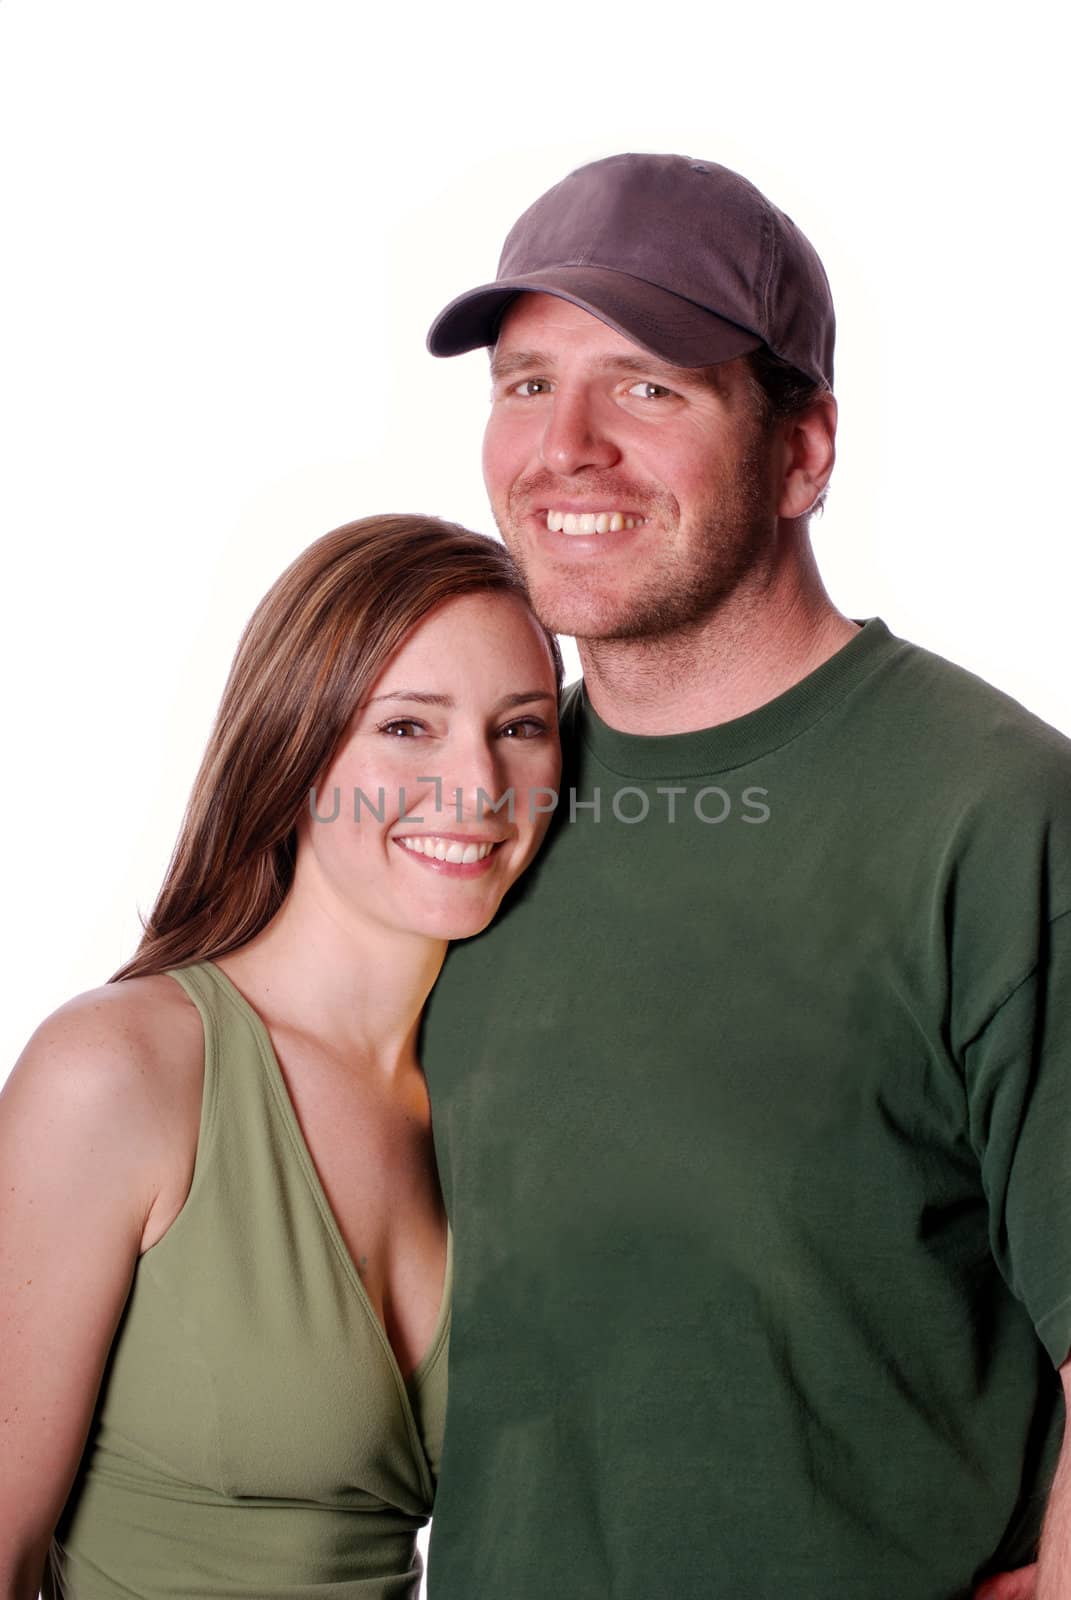 Vertical high key image of an attractive smiling couple, both wearing green tops, against a white background.